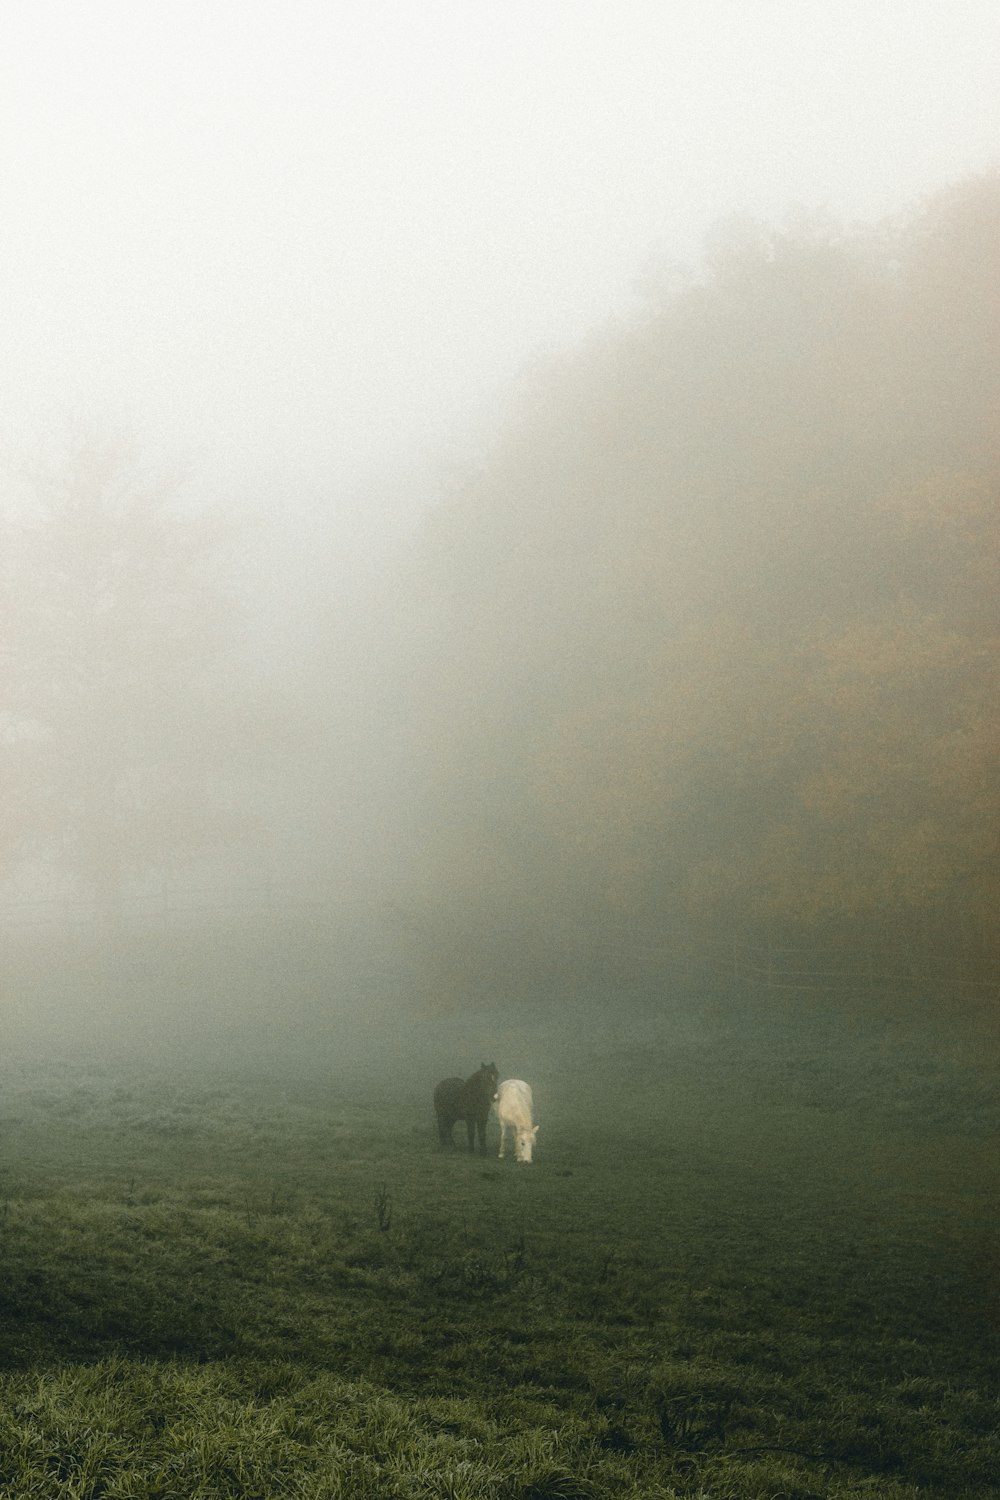 white sheep on green grass field covered with fog